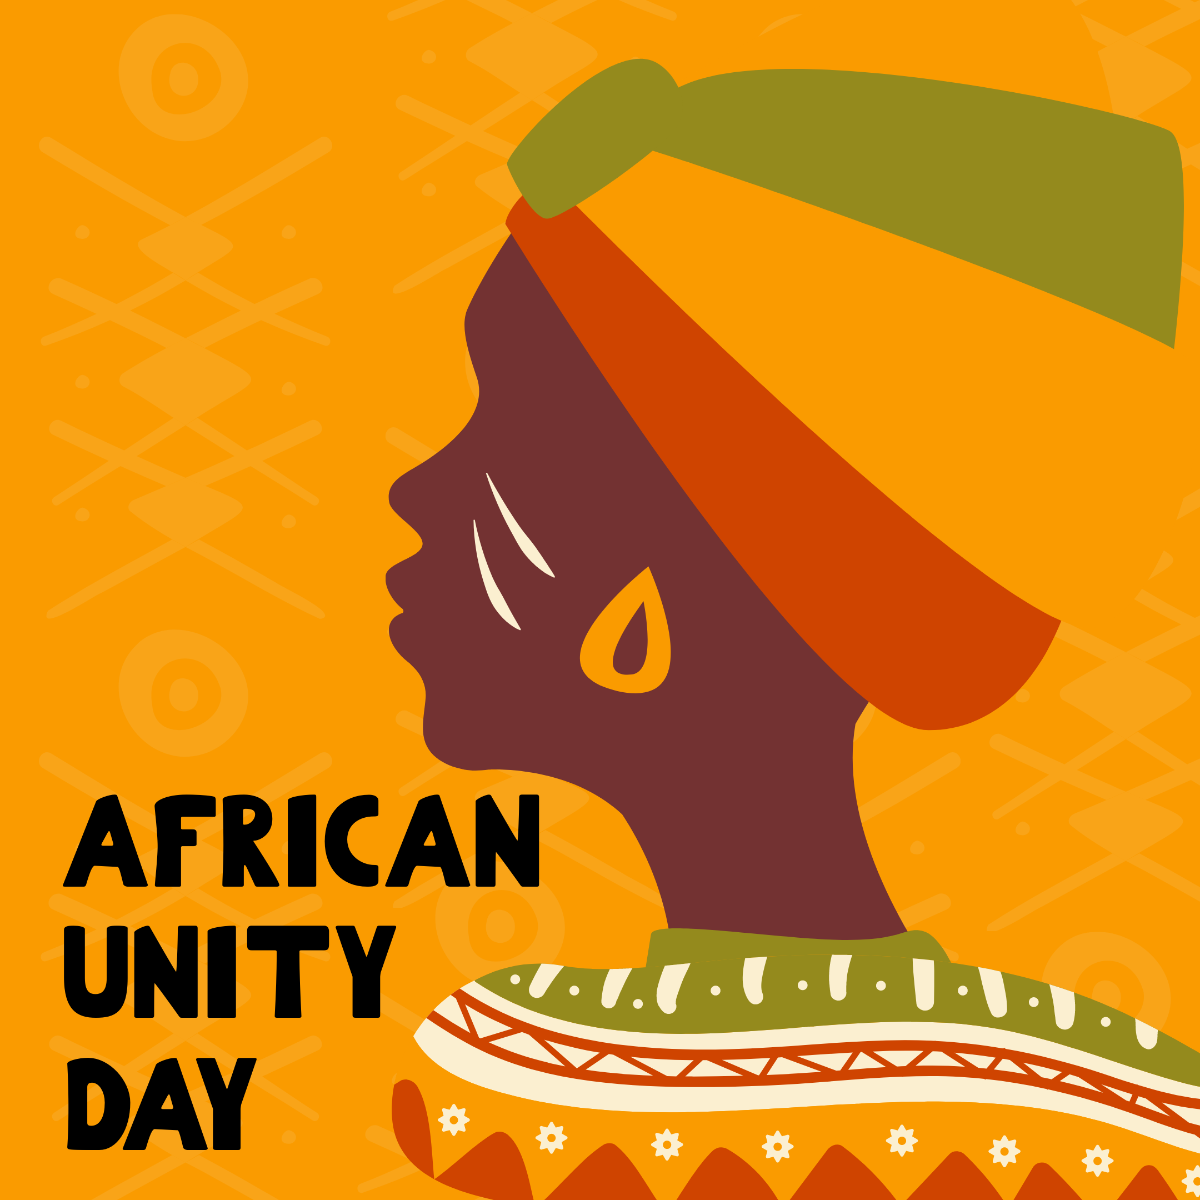 African Unity Day Image Template